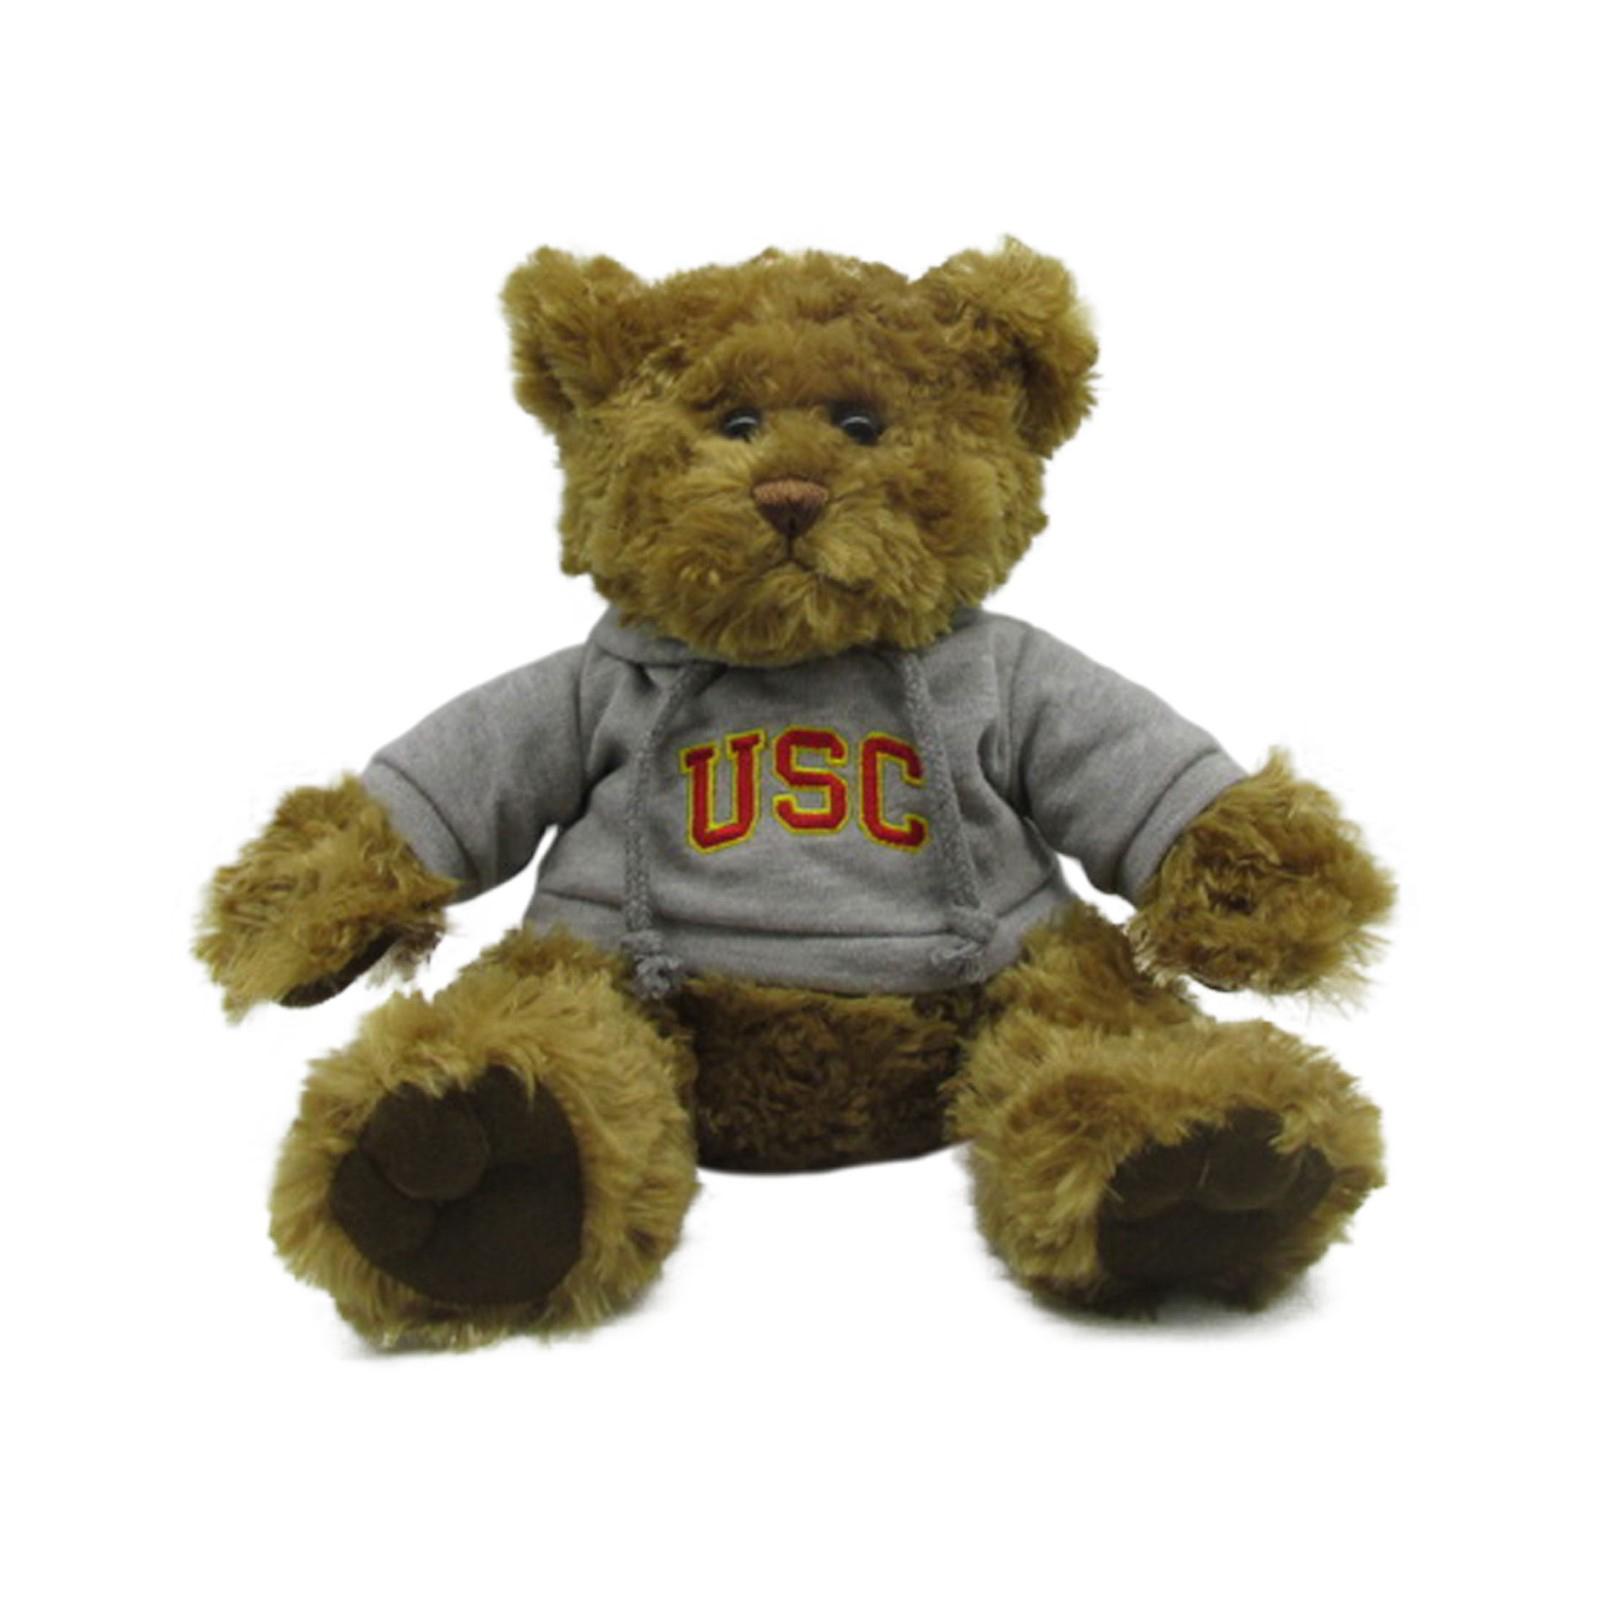 USC Embroidered Hood Bear Grey by Mascot Factory image01